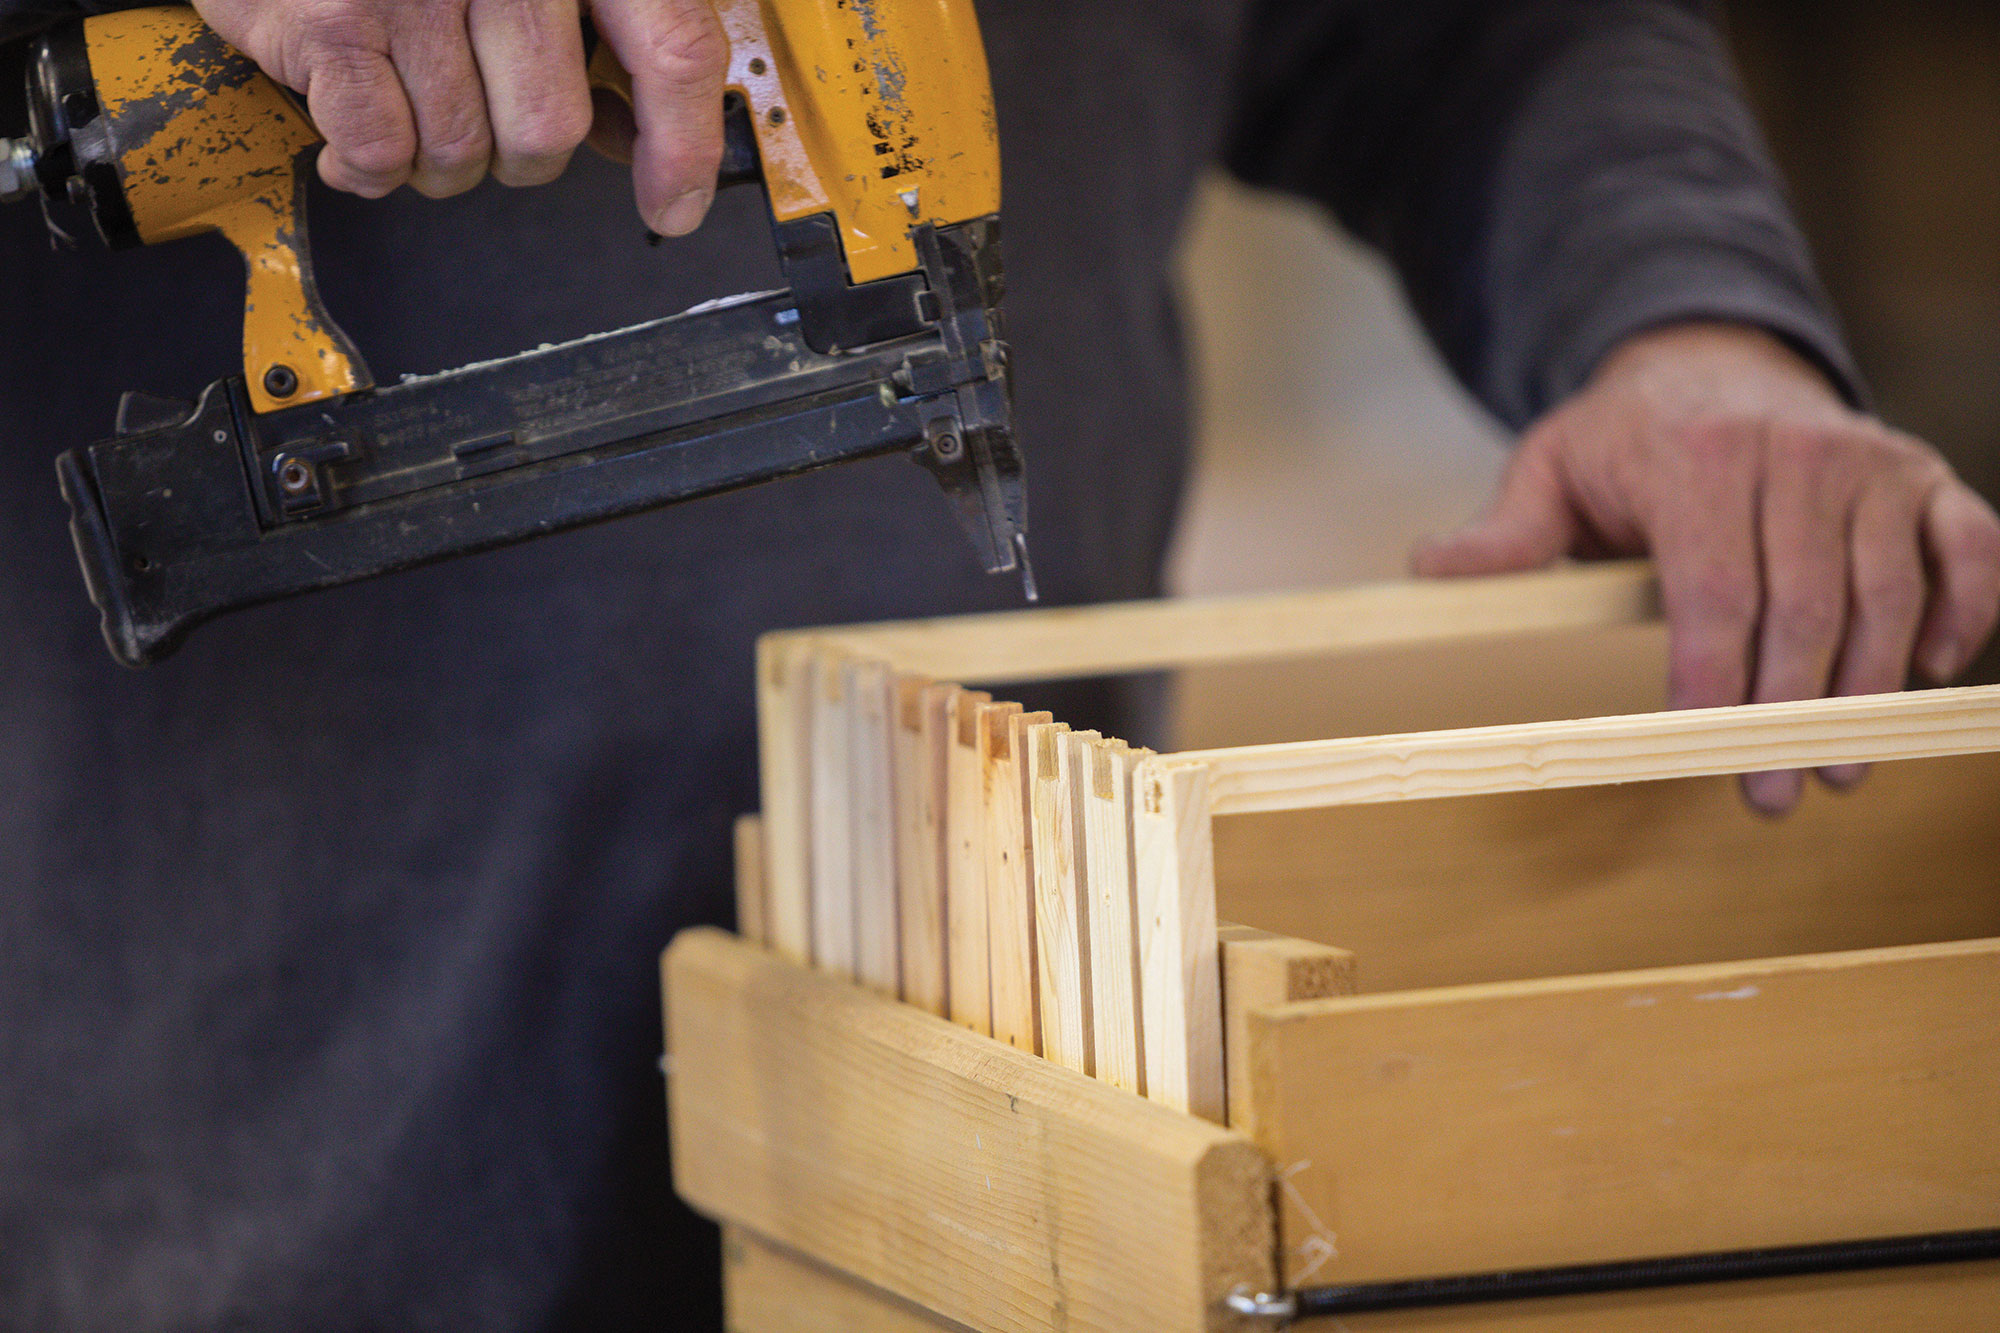 Attaching pieces to the beehive with a nailgun.